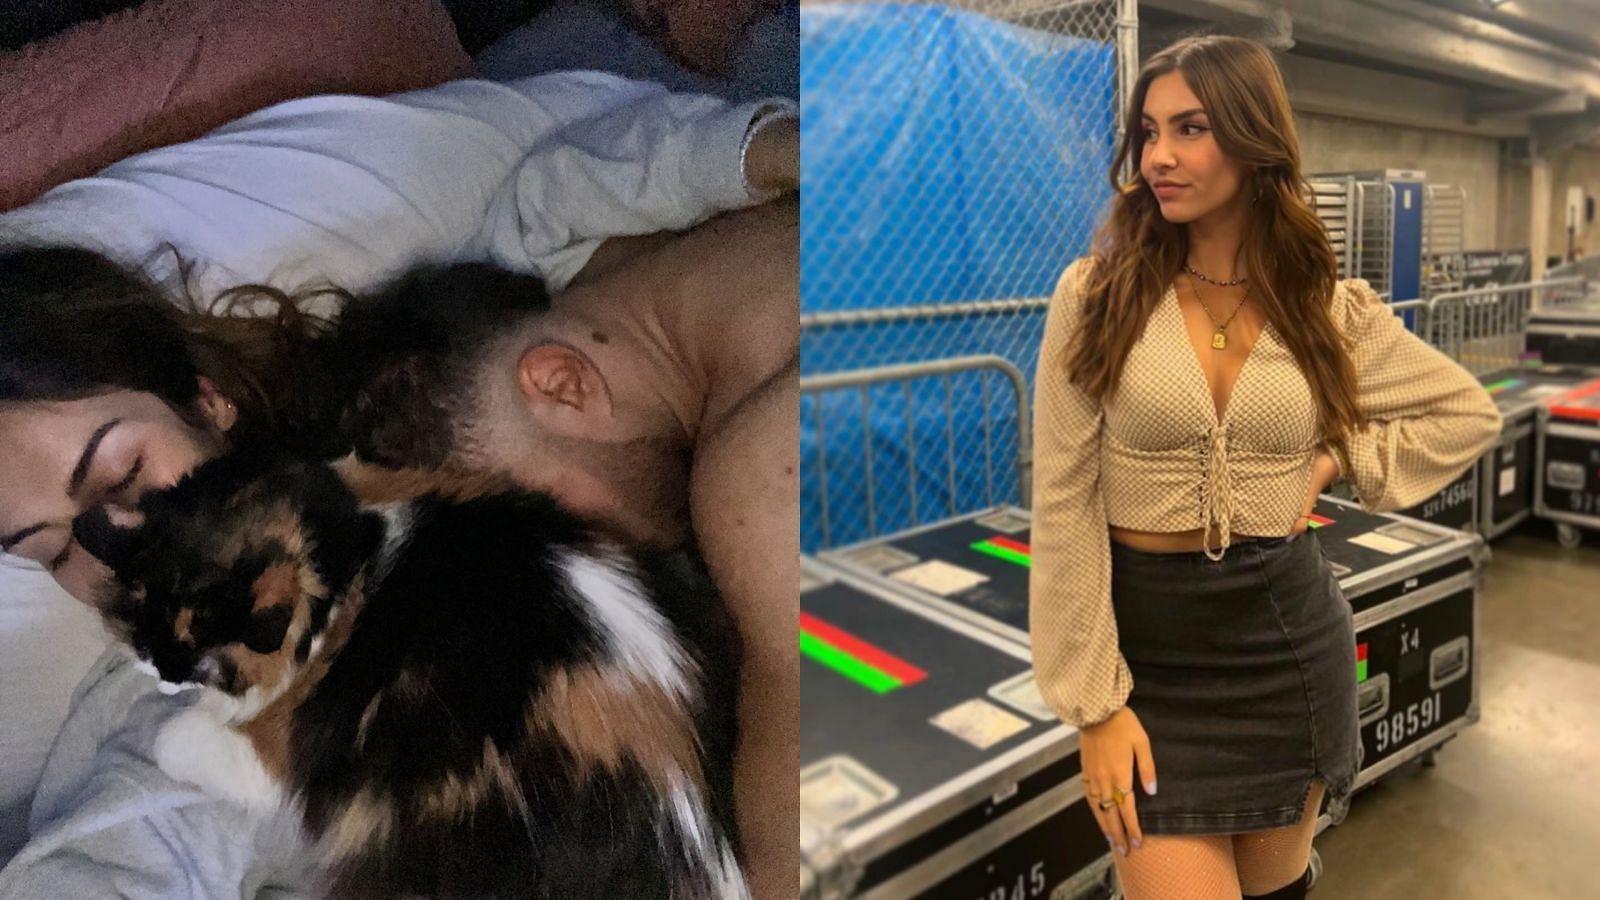 Alicia Atout was revealed to be the one MJF is currently dating